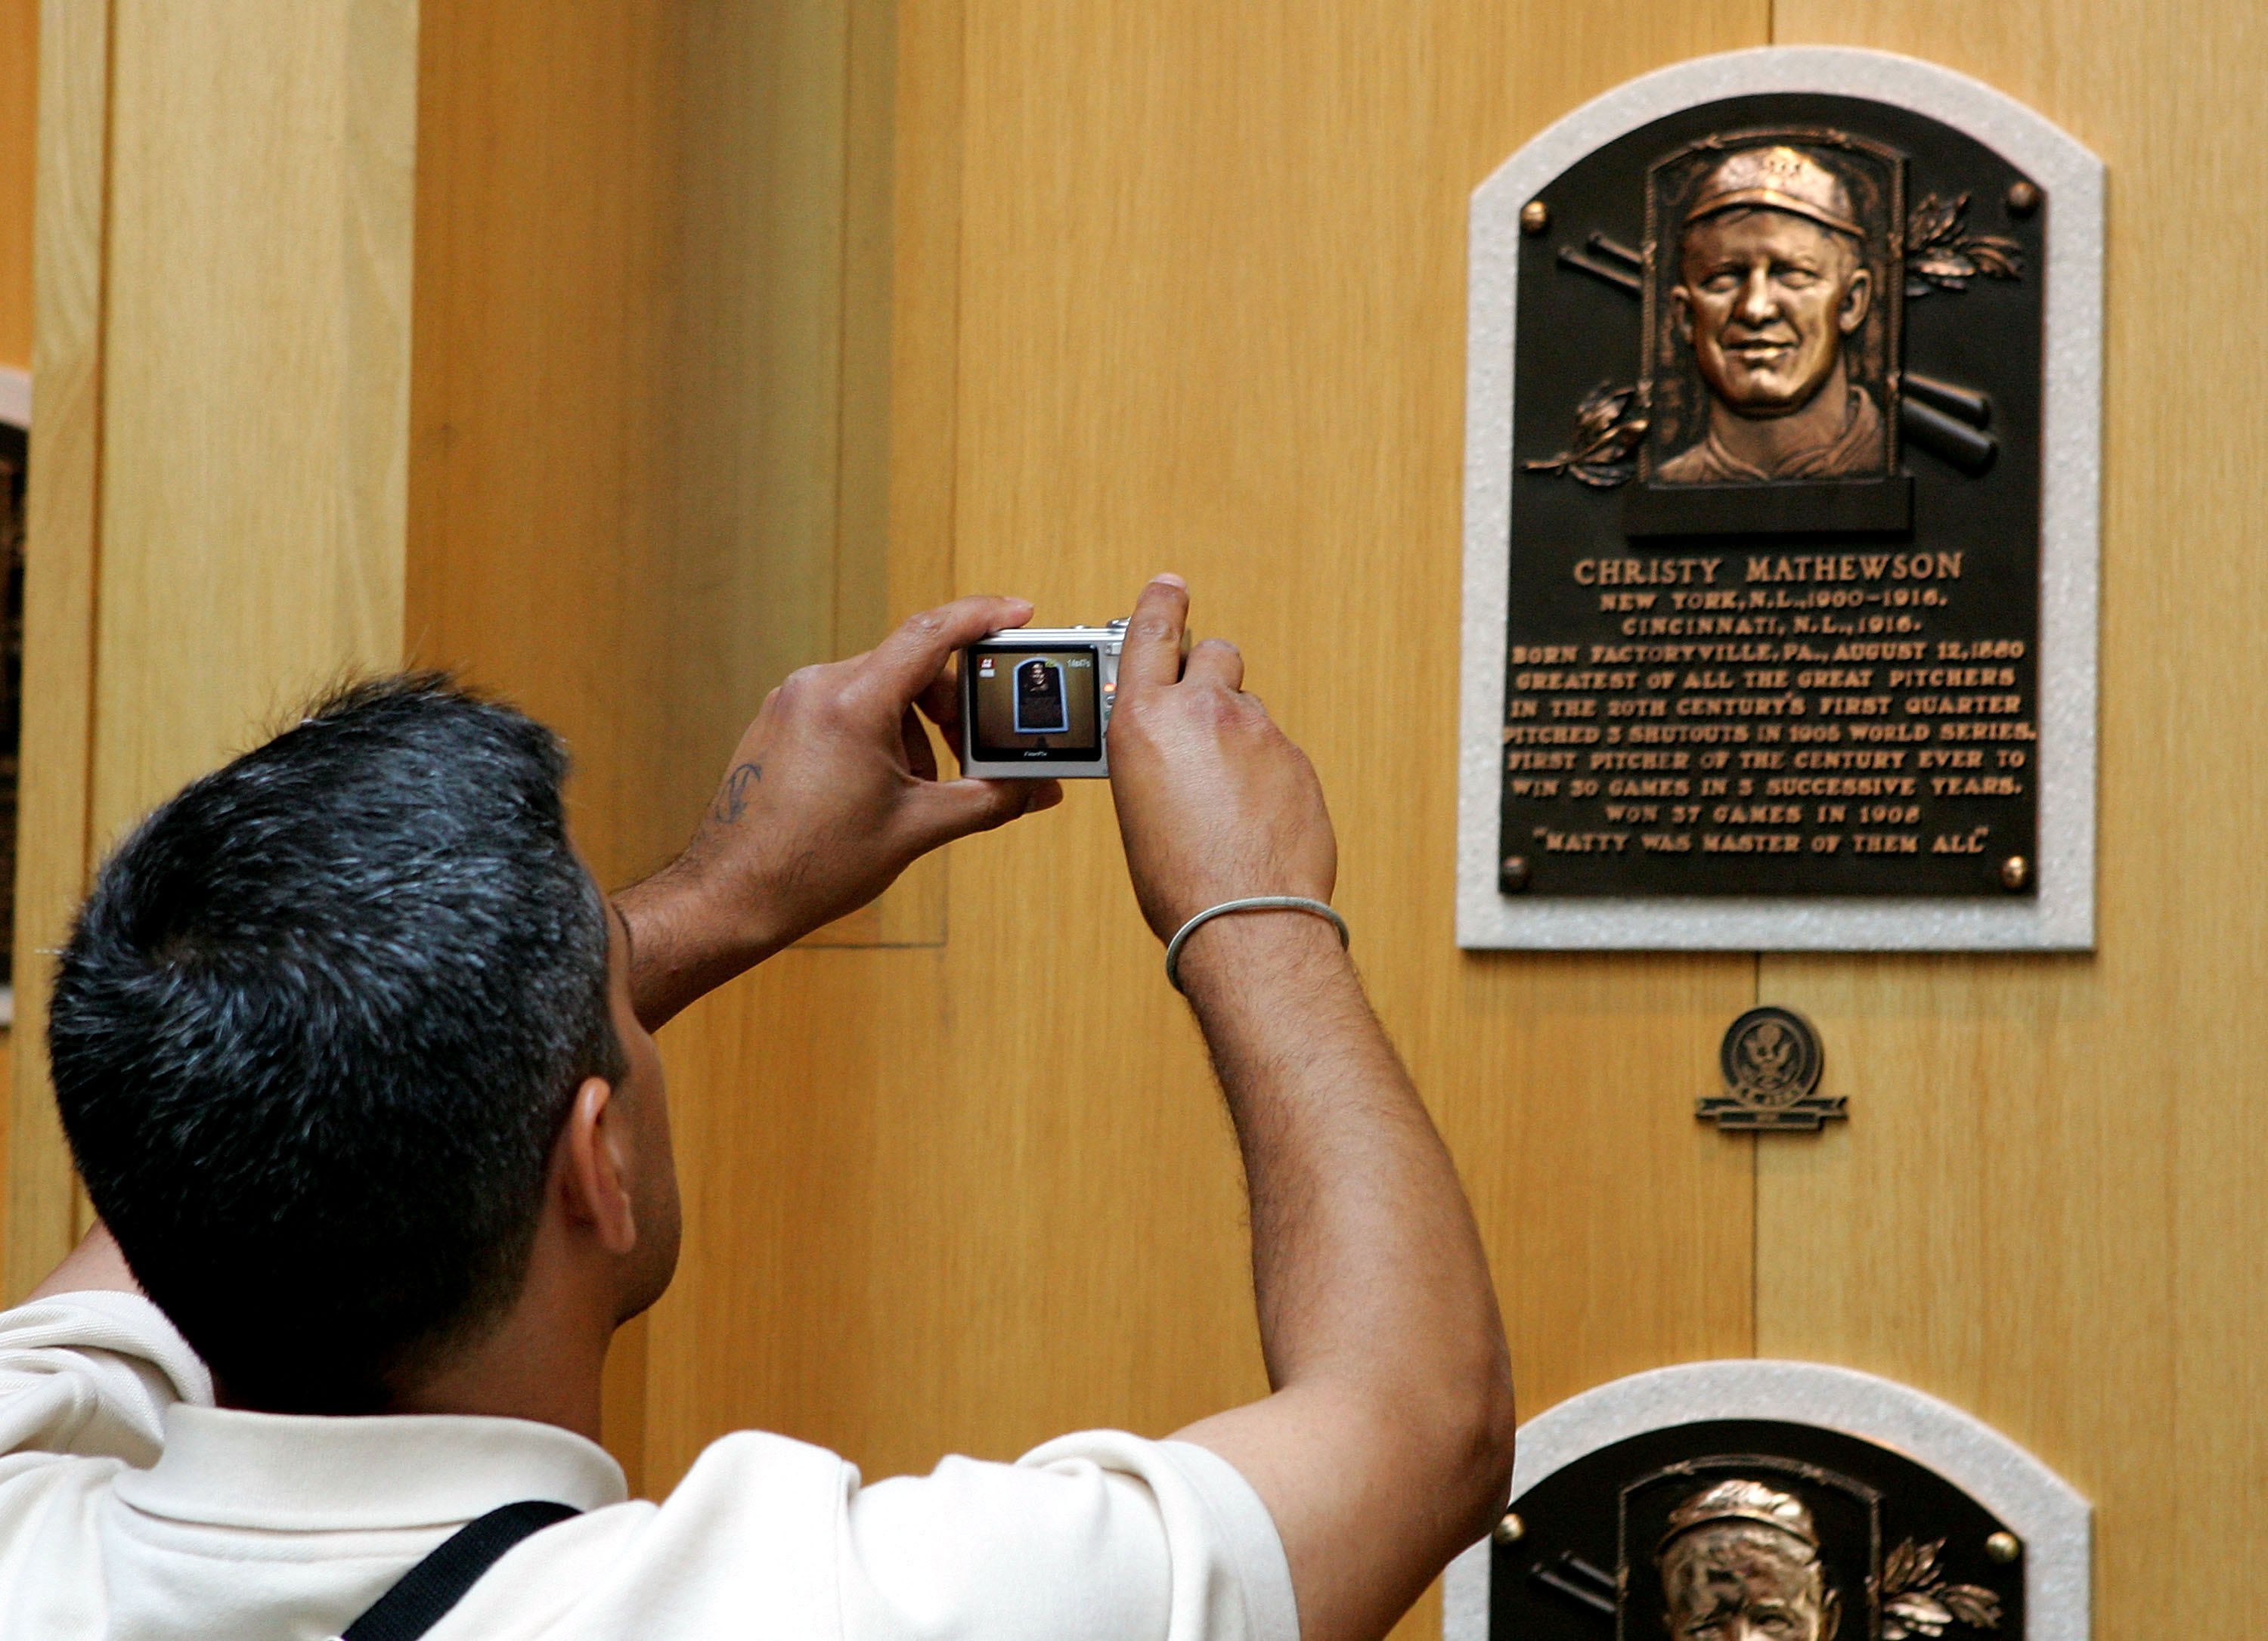 COOPERSTOWN, NY - JULY 29:  A baseball fan photograghs the plaque of Christy Mathewson at the National Baseball Hall of Fame and Museum during the Baseball Hall of Fame weekend on July 29, 2006 in Cooperstown, New York.  (Photo by Jim McIsaac/Getty Images